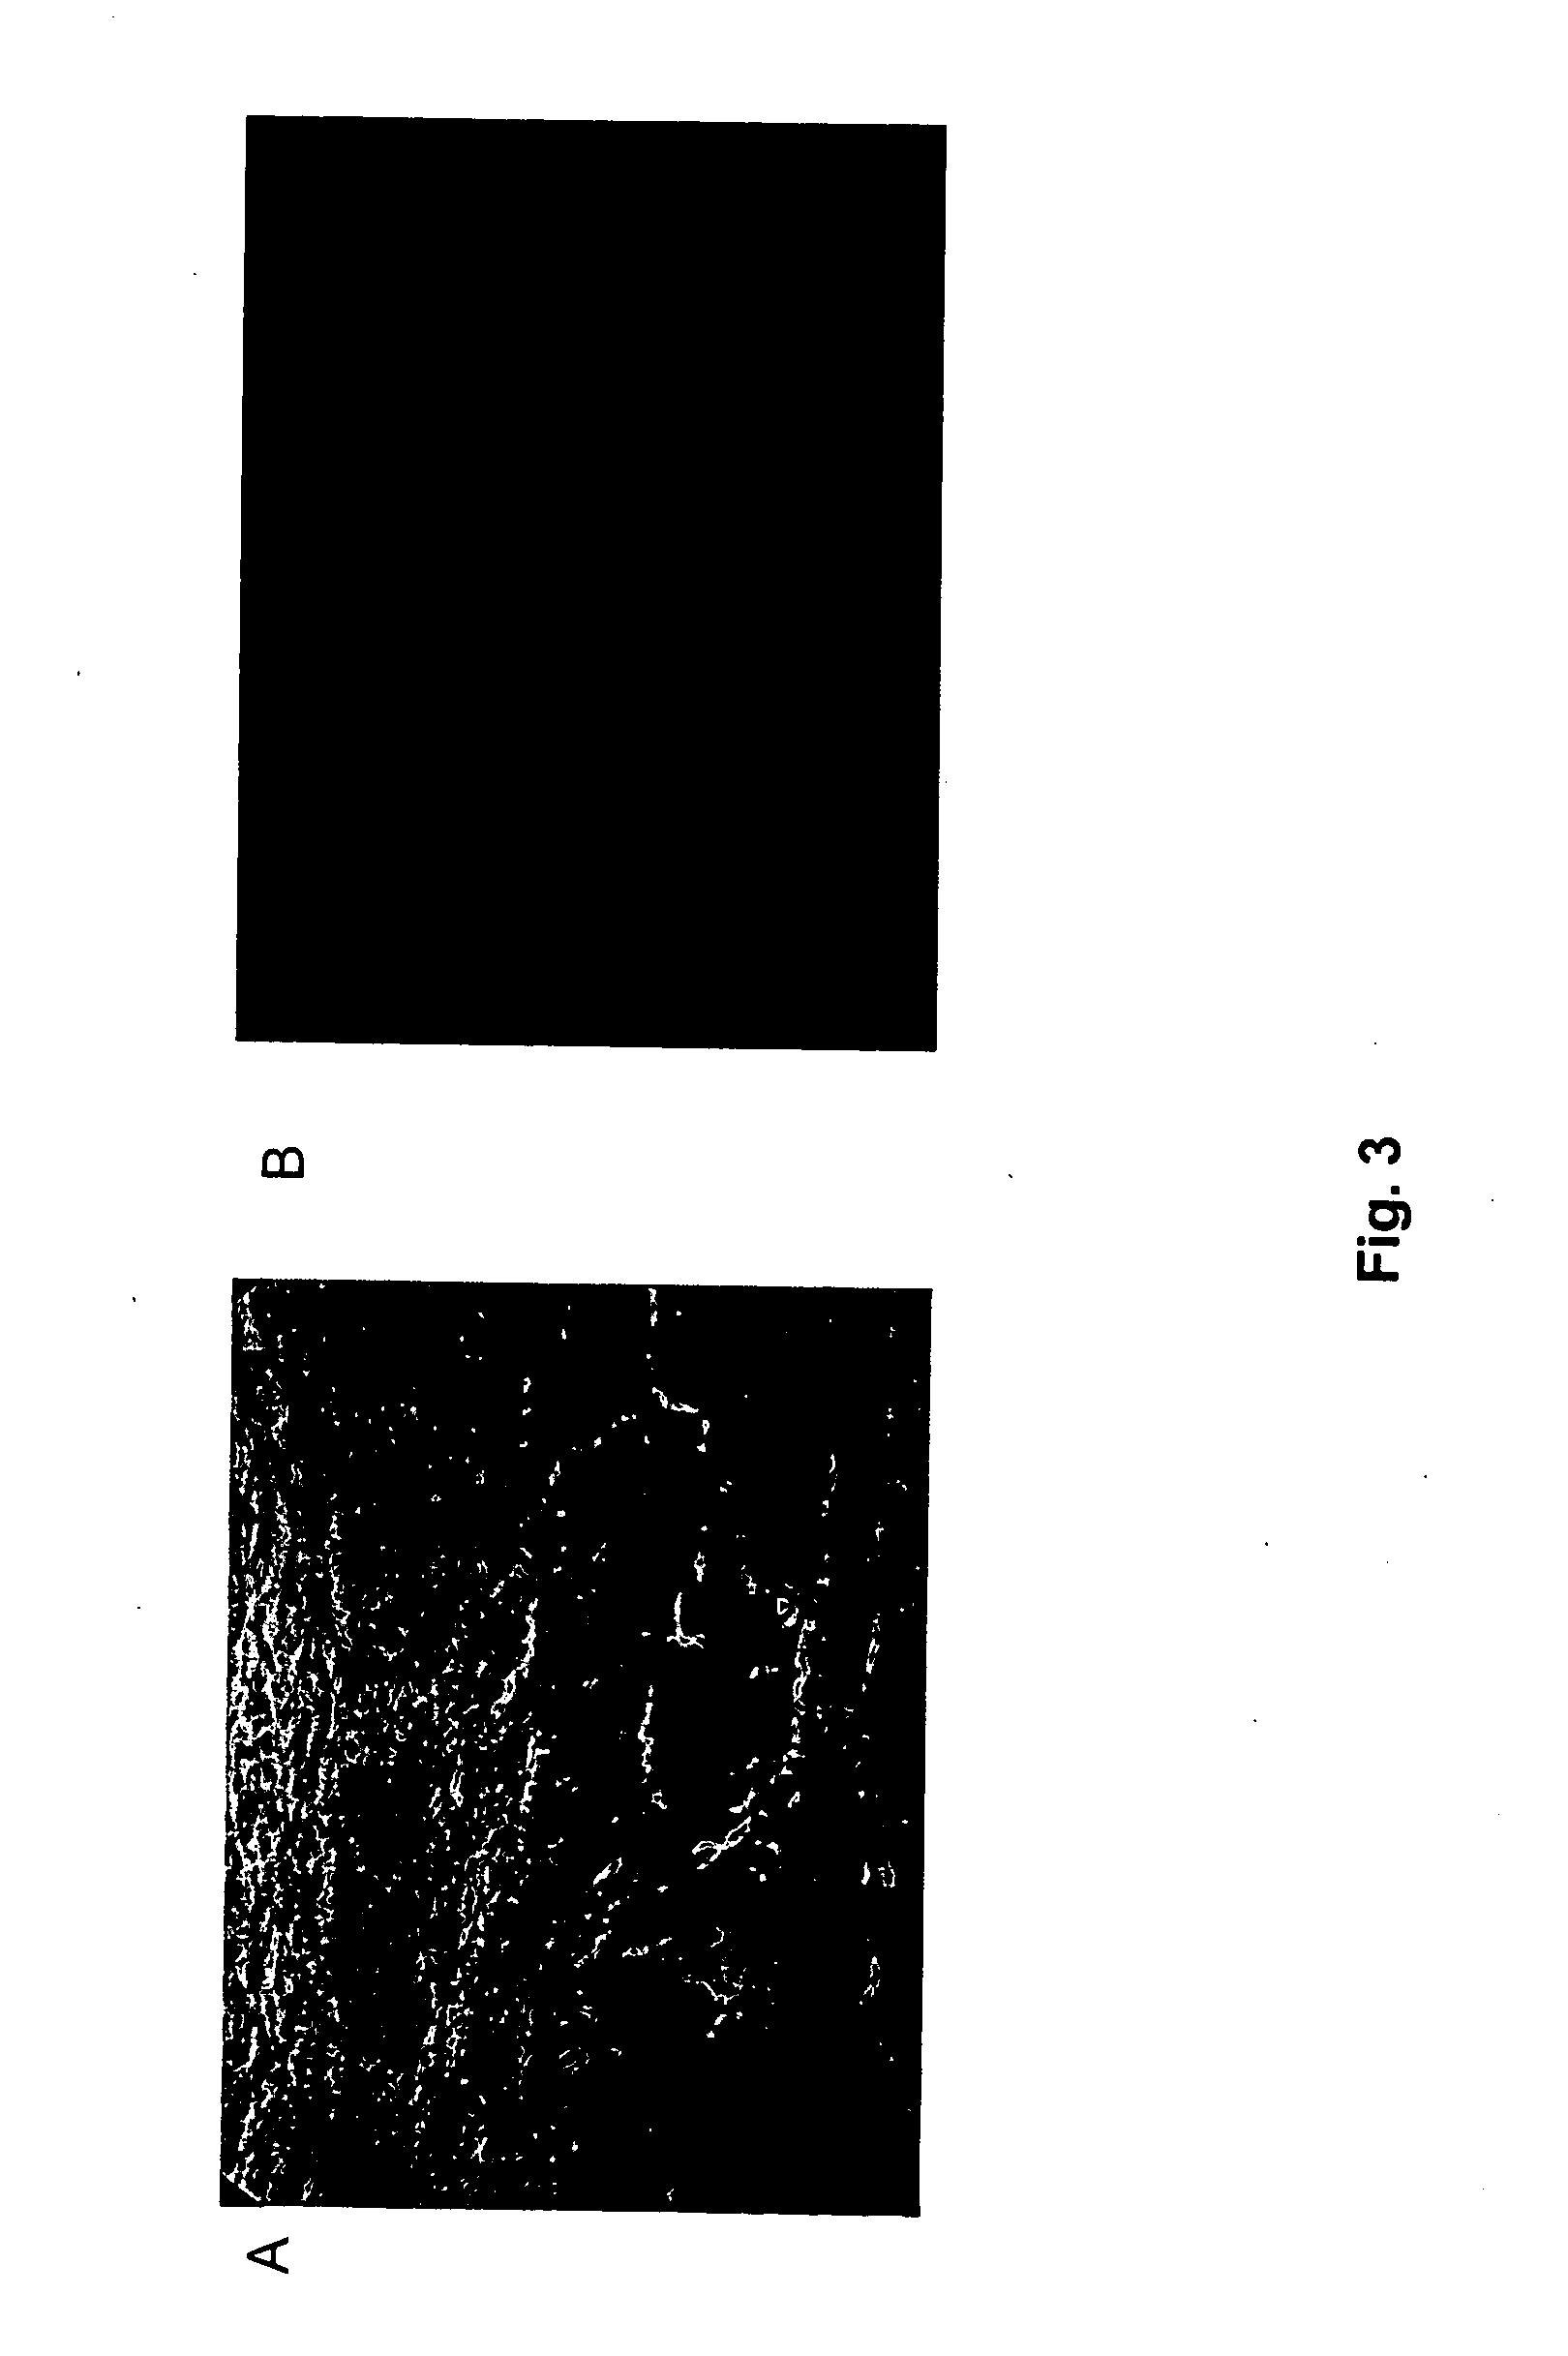 Novel recombinant poxvirus composition and uses thereof